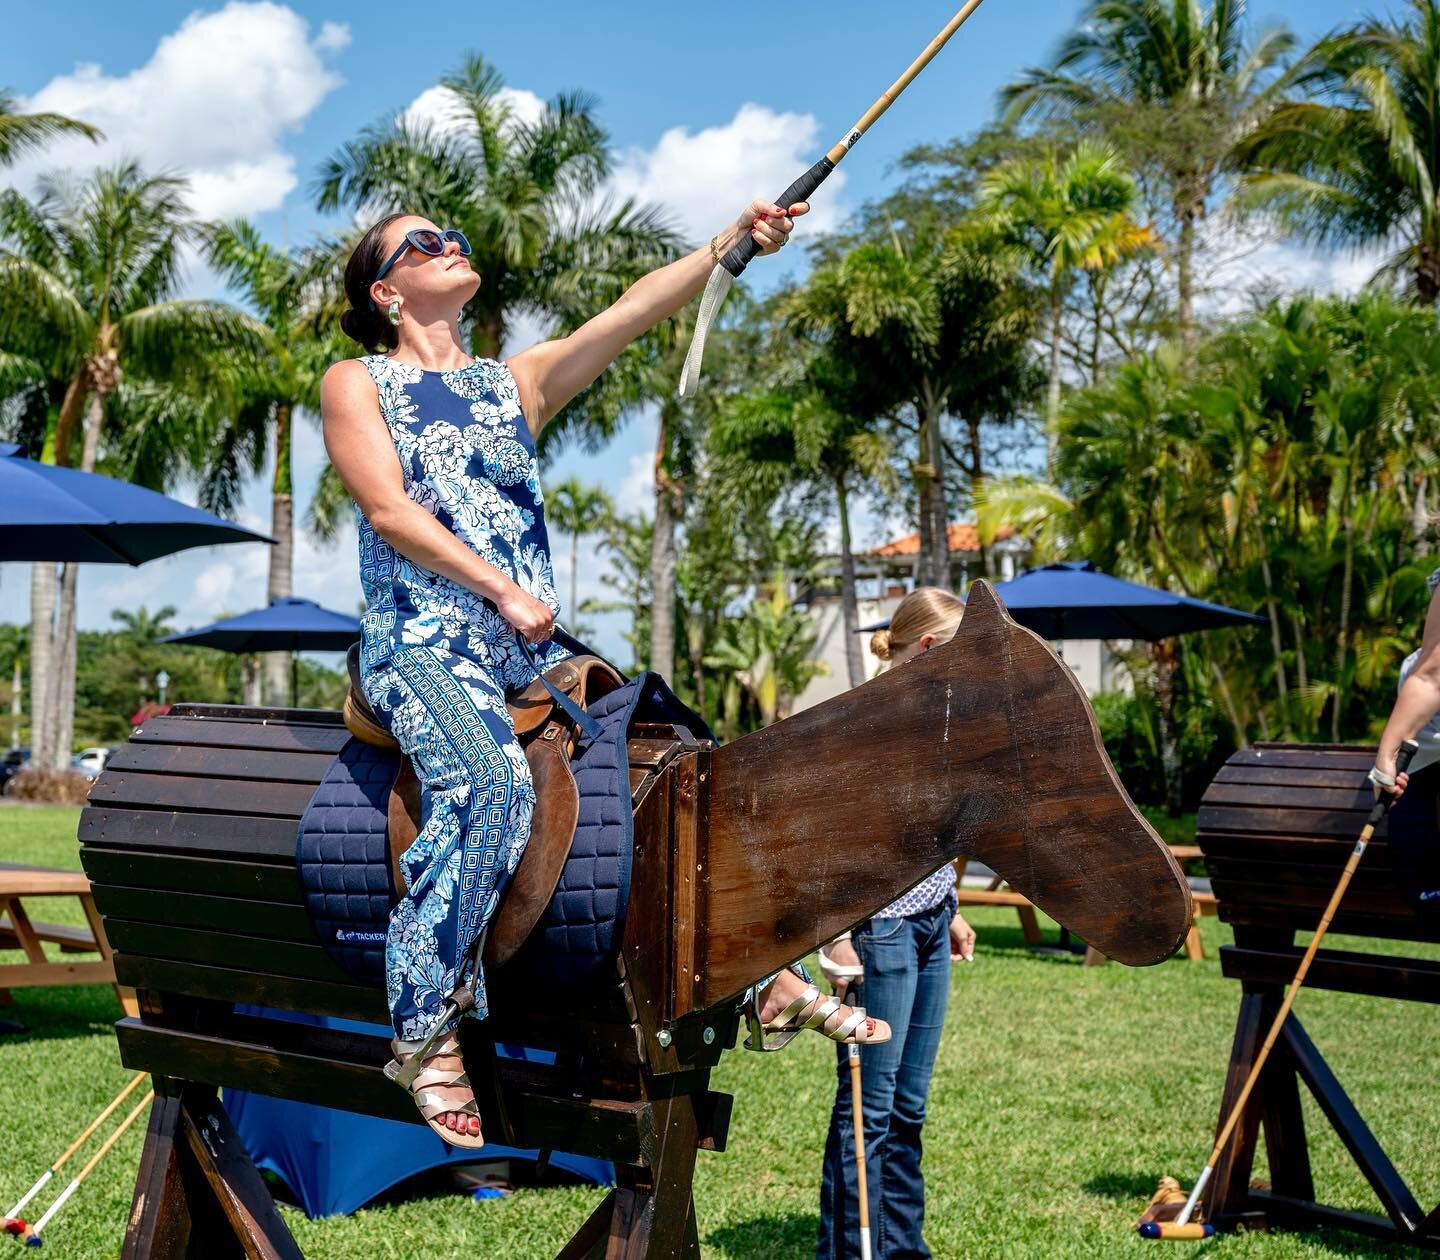 Trying my hand at polo here in Palm Beach! You know I can&rsquo;t just sit back and watch. I have to get involved! And, let me tell you it is very hard and I wasn&rsquo;t even on a real horse. But, I did score ;) We also got to watch a Polo match @us